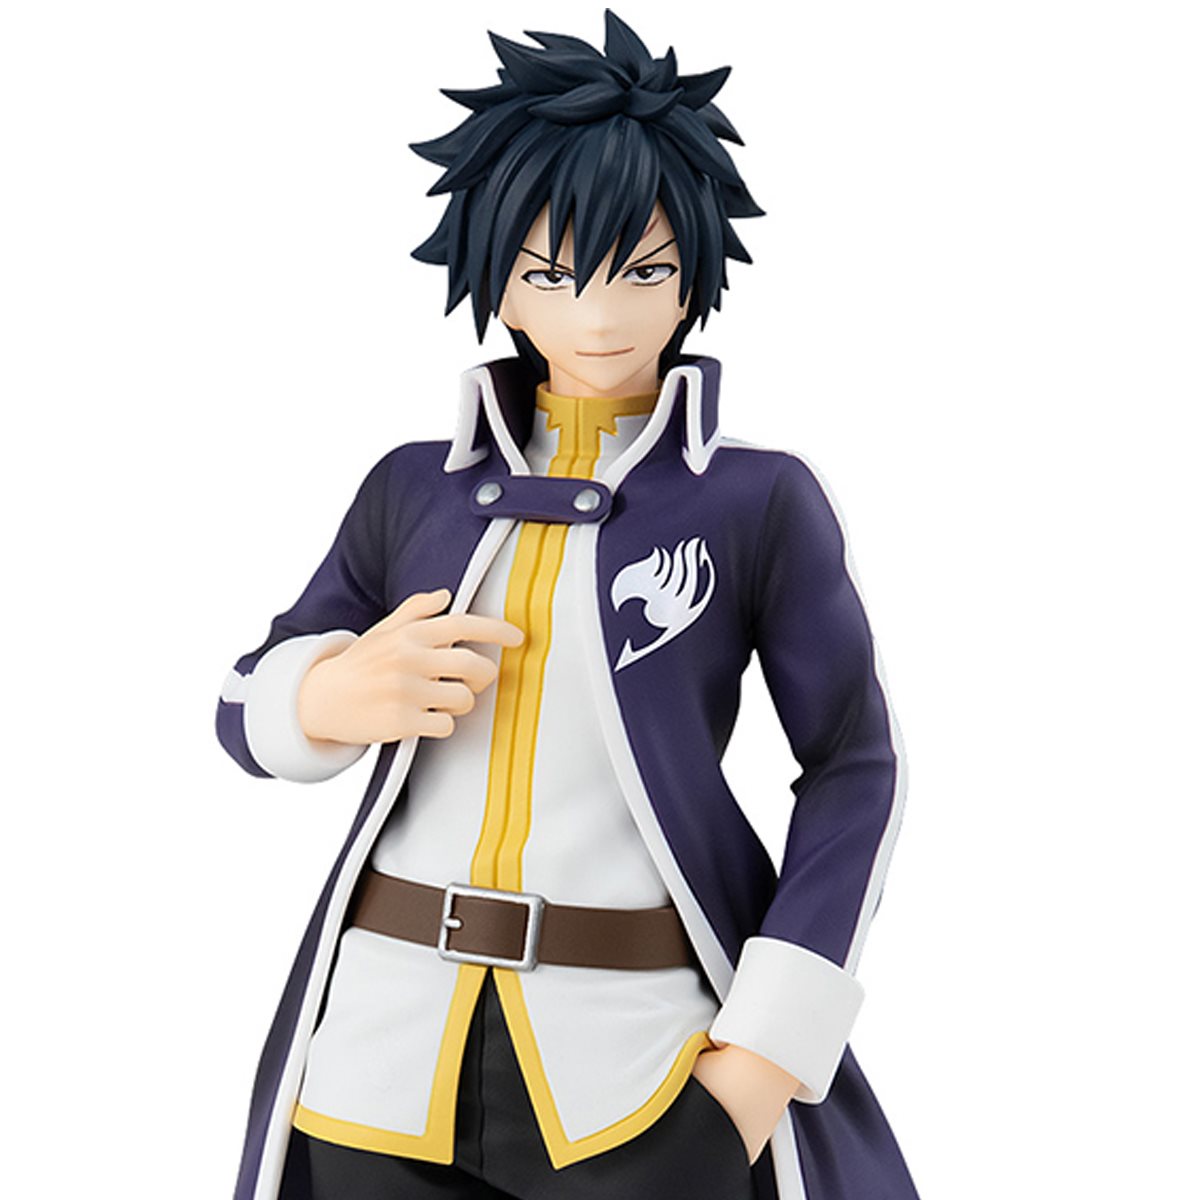 Fairy Tail Action Figures, Statues, Collectibles, and More!